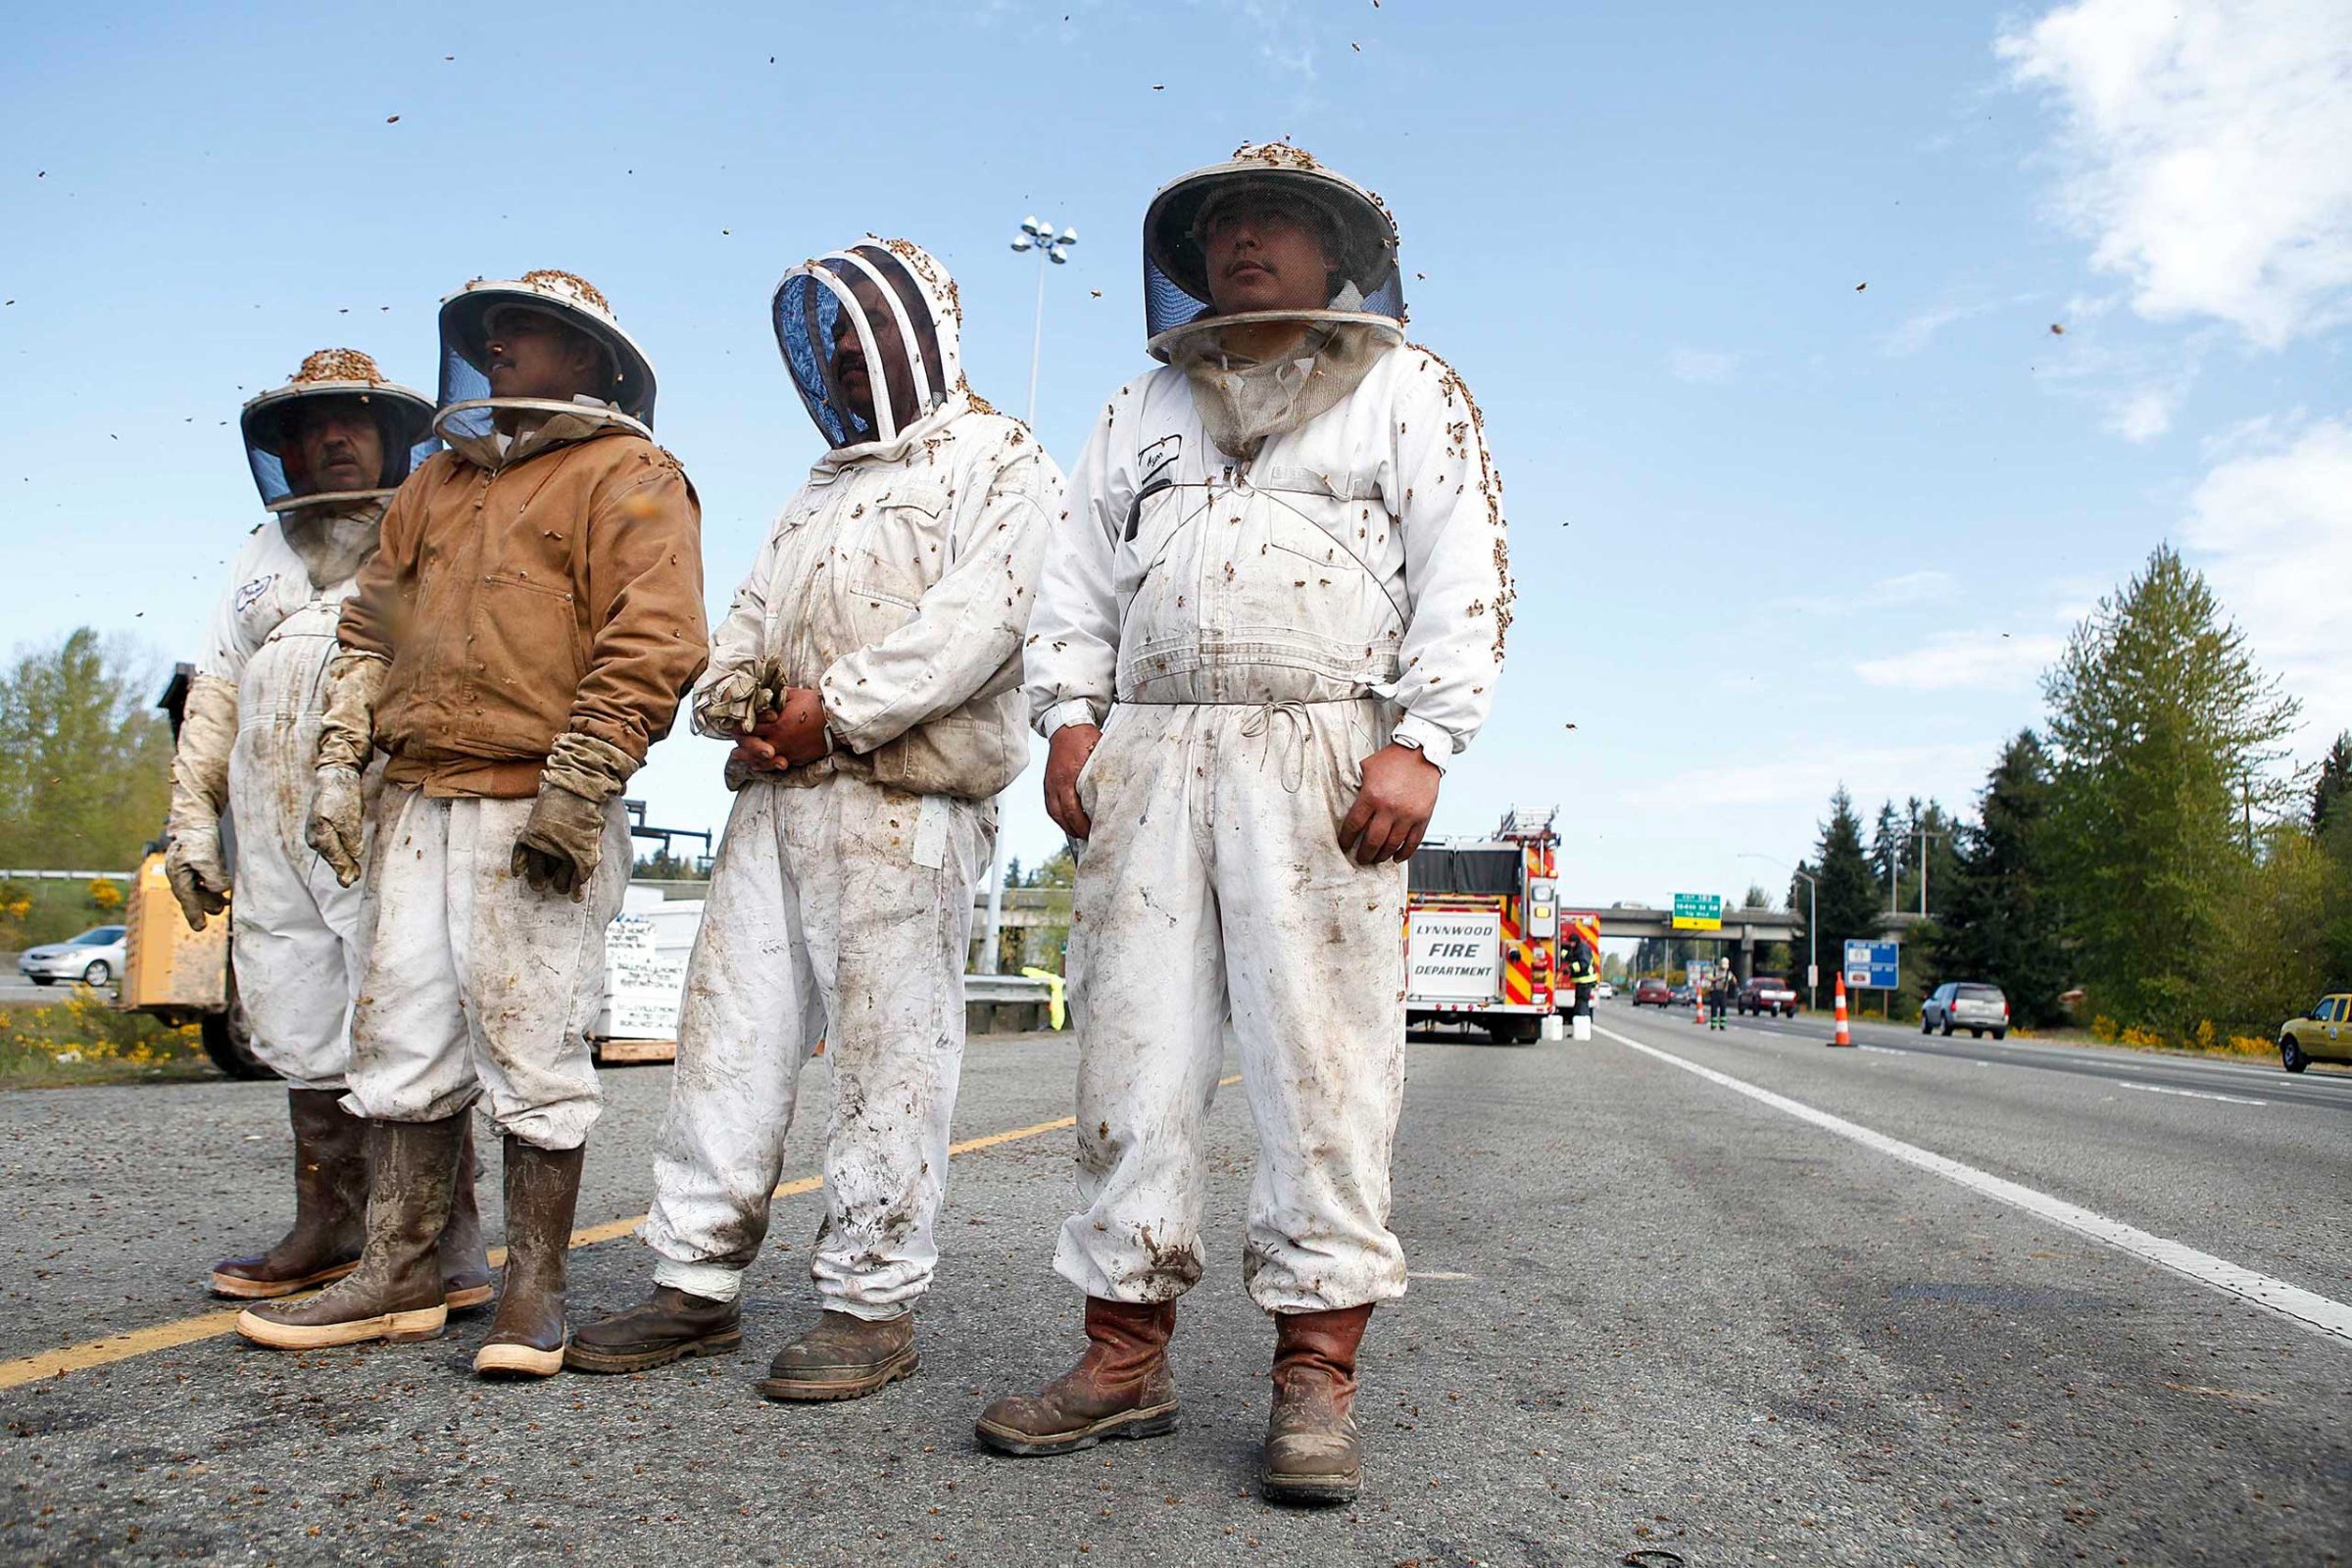 Beekeepers attend to a semi-trailer truck that overturned with a cargo of bees on a highway in Lynnwood